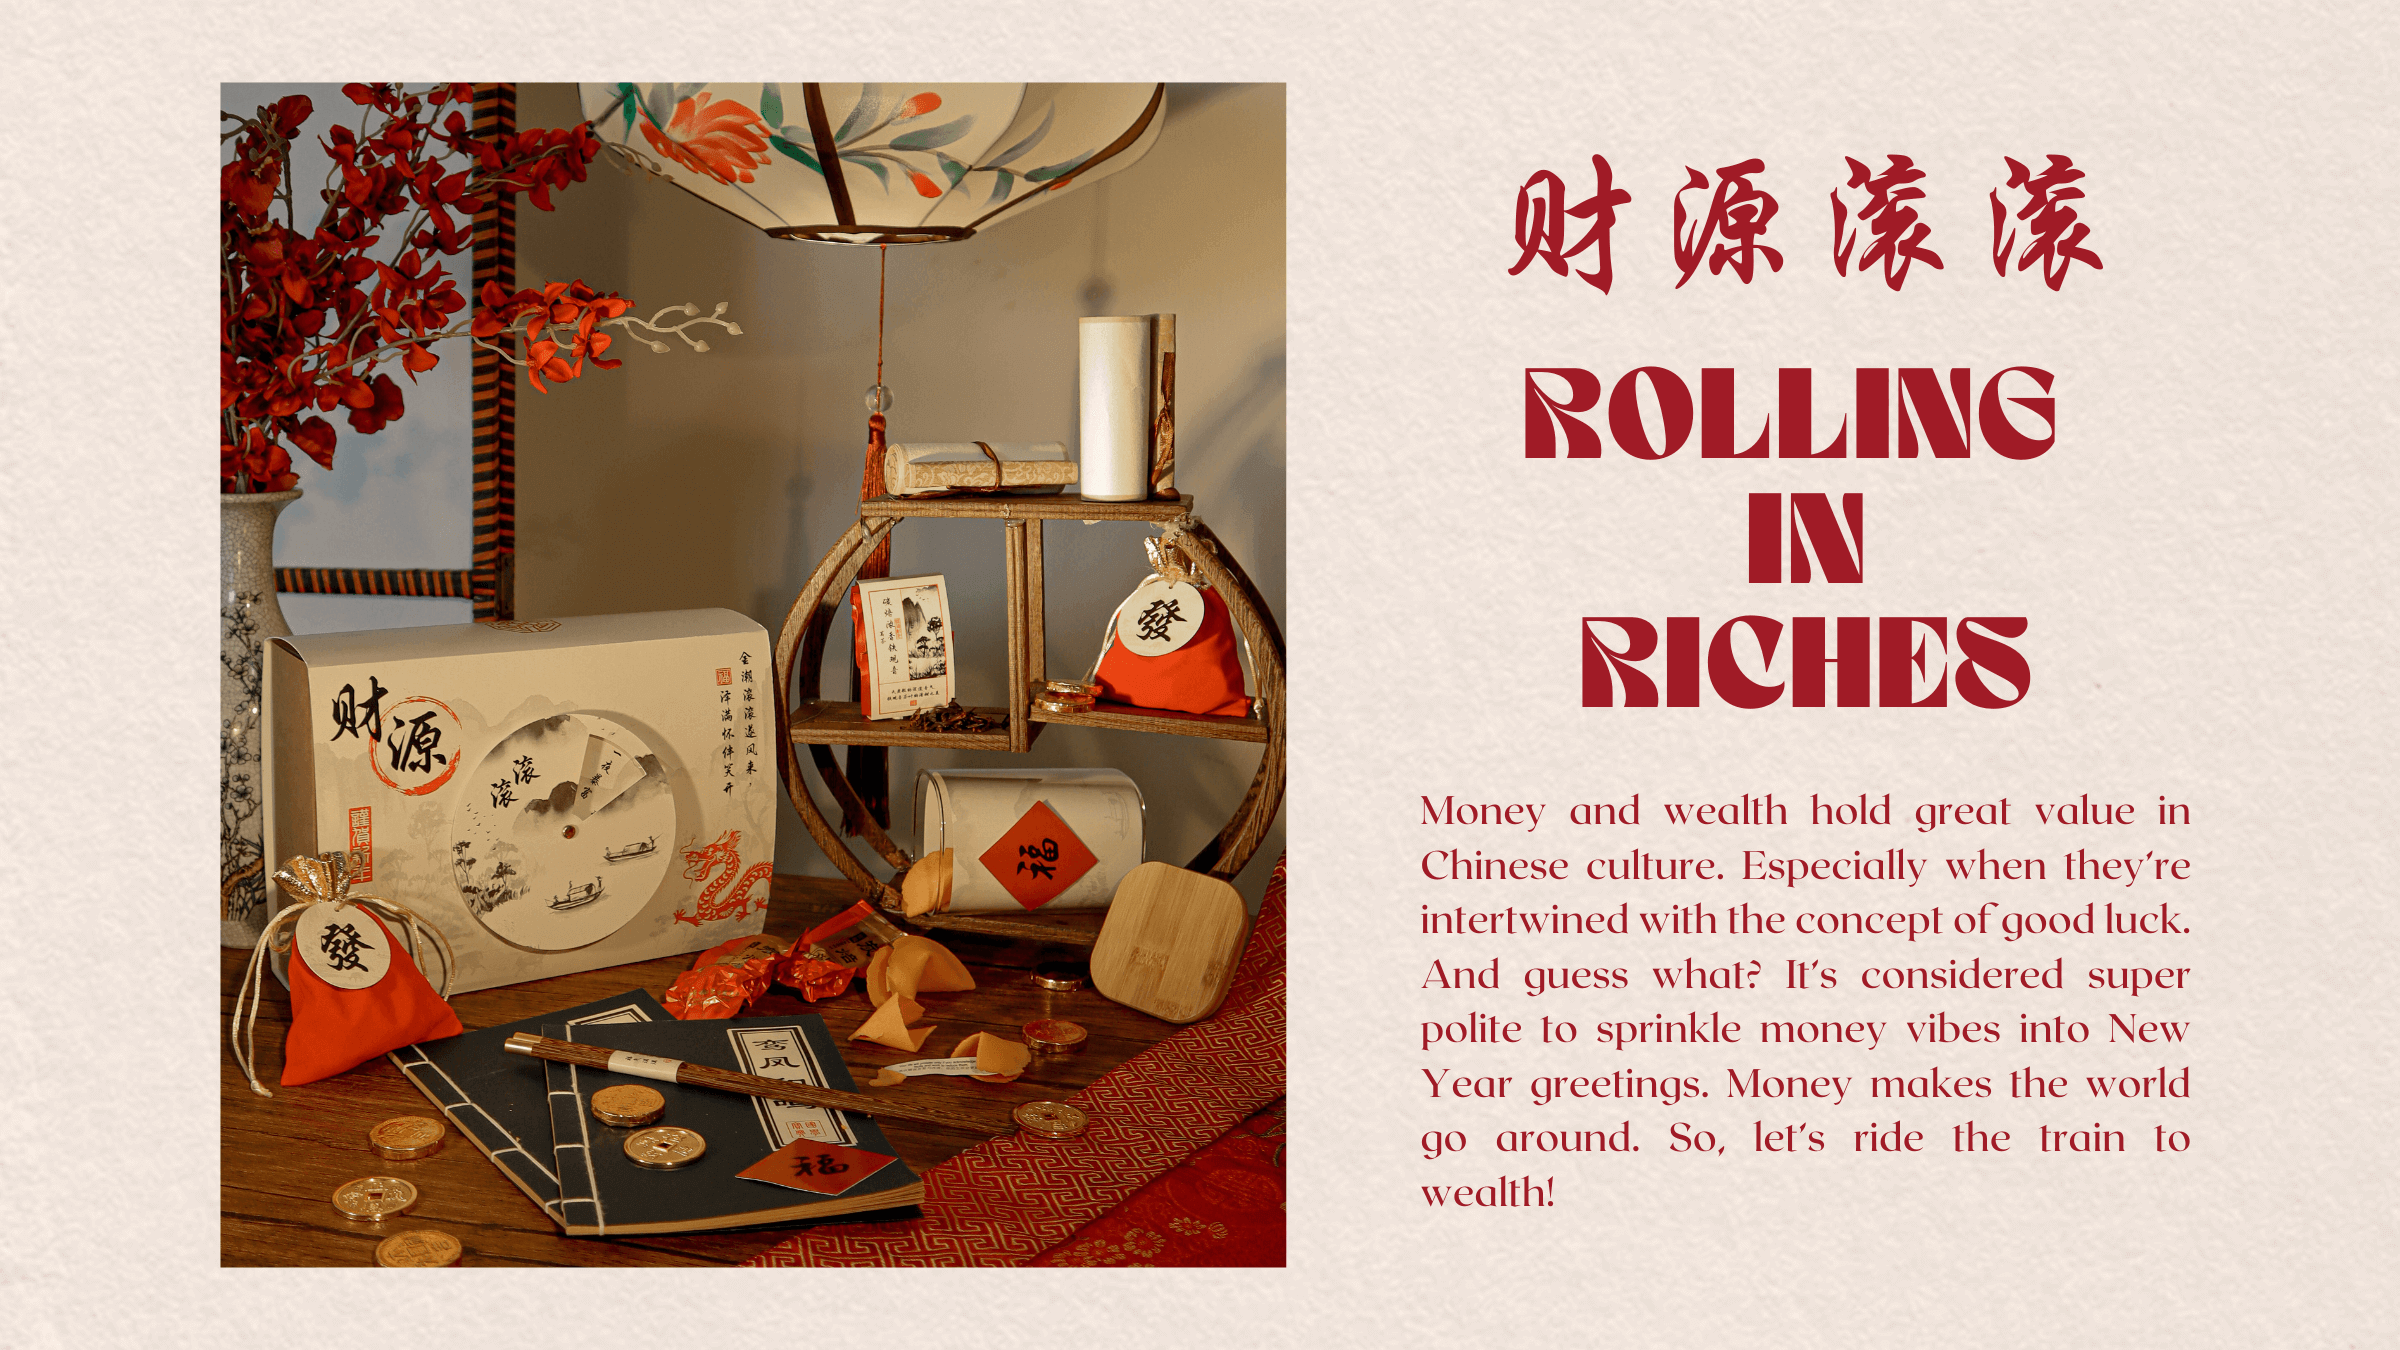 6. Rolling in Riches